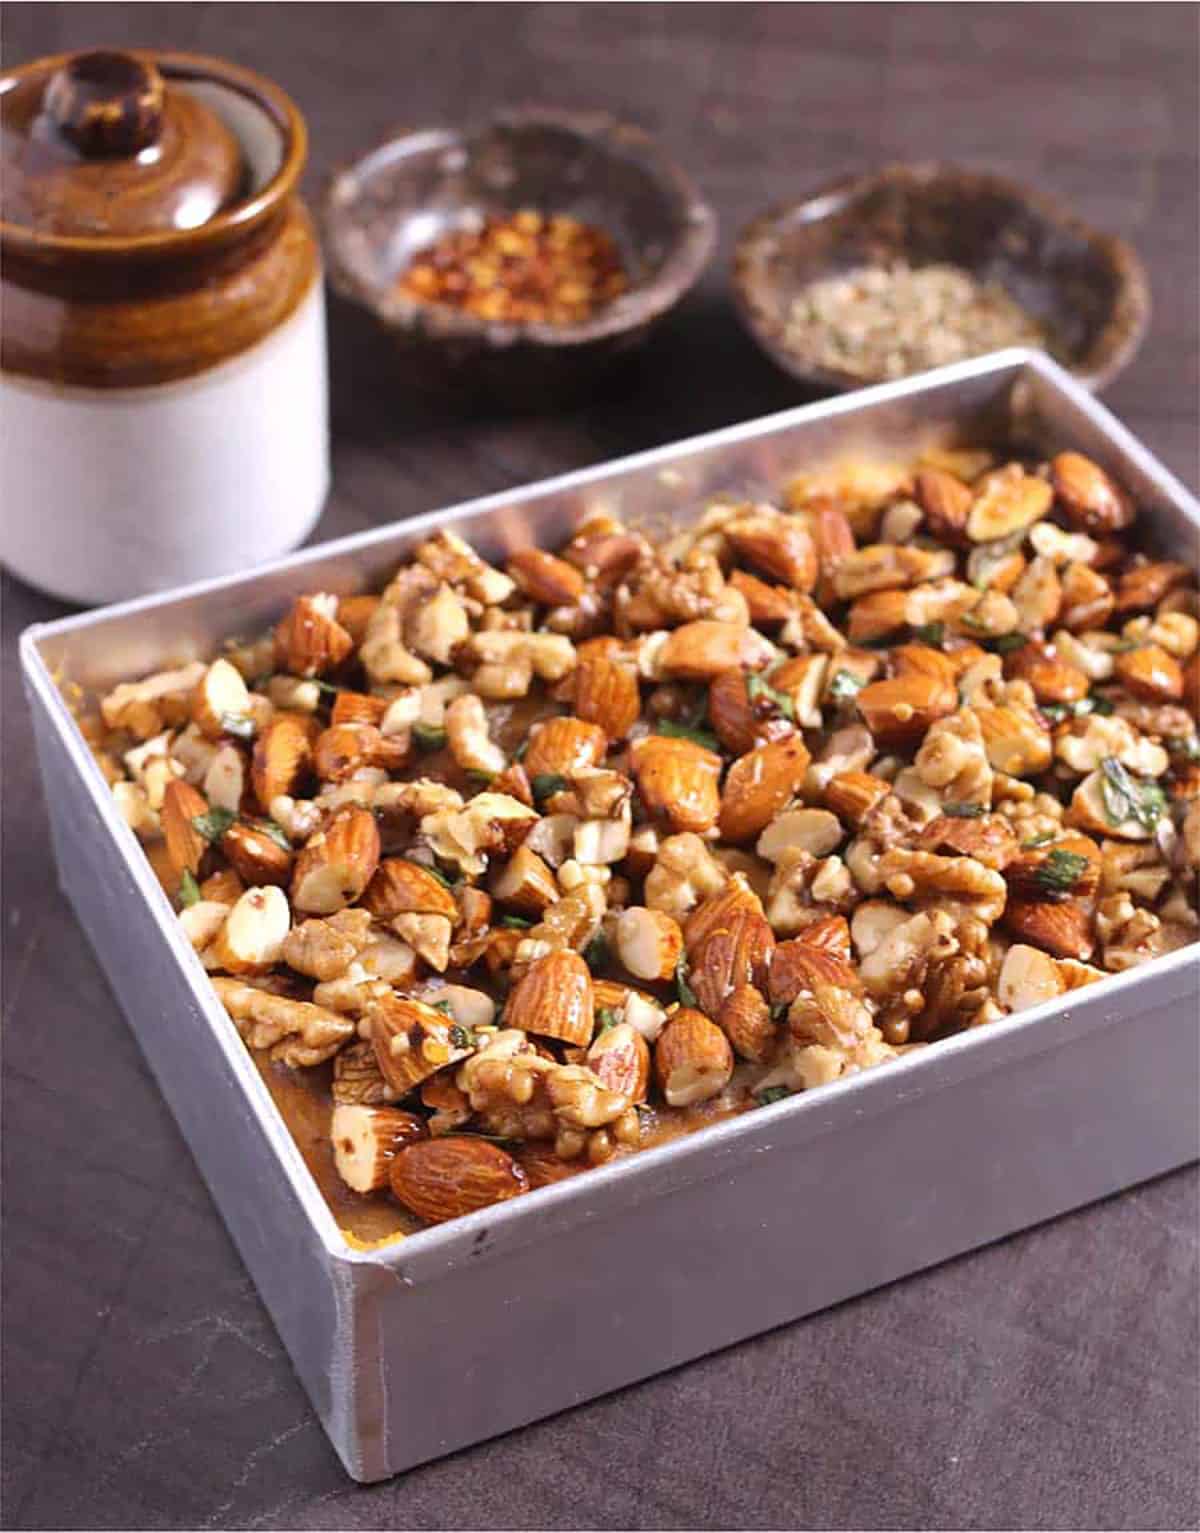 Sweet potato casserole on baking dish topped with almonds and walnuts 